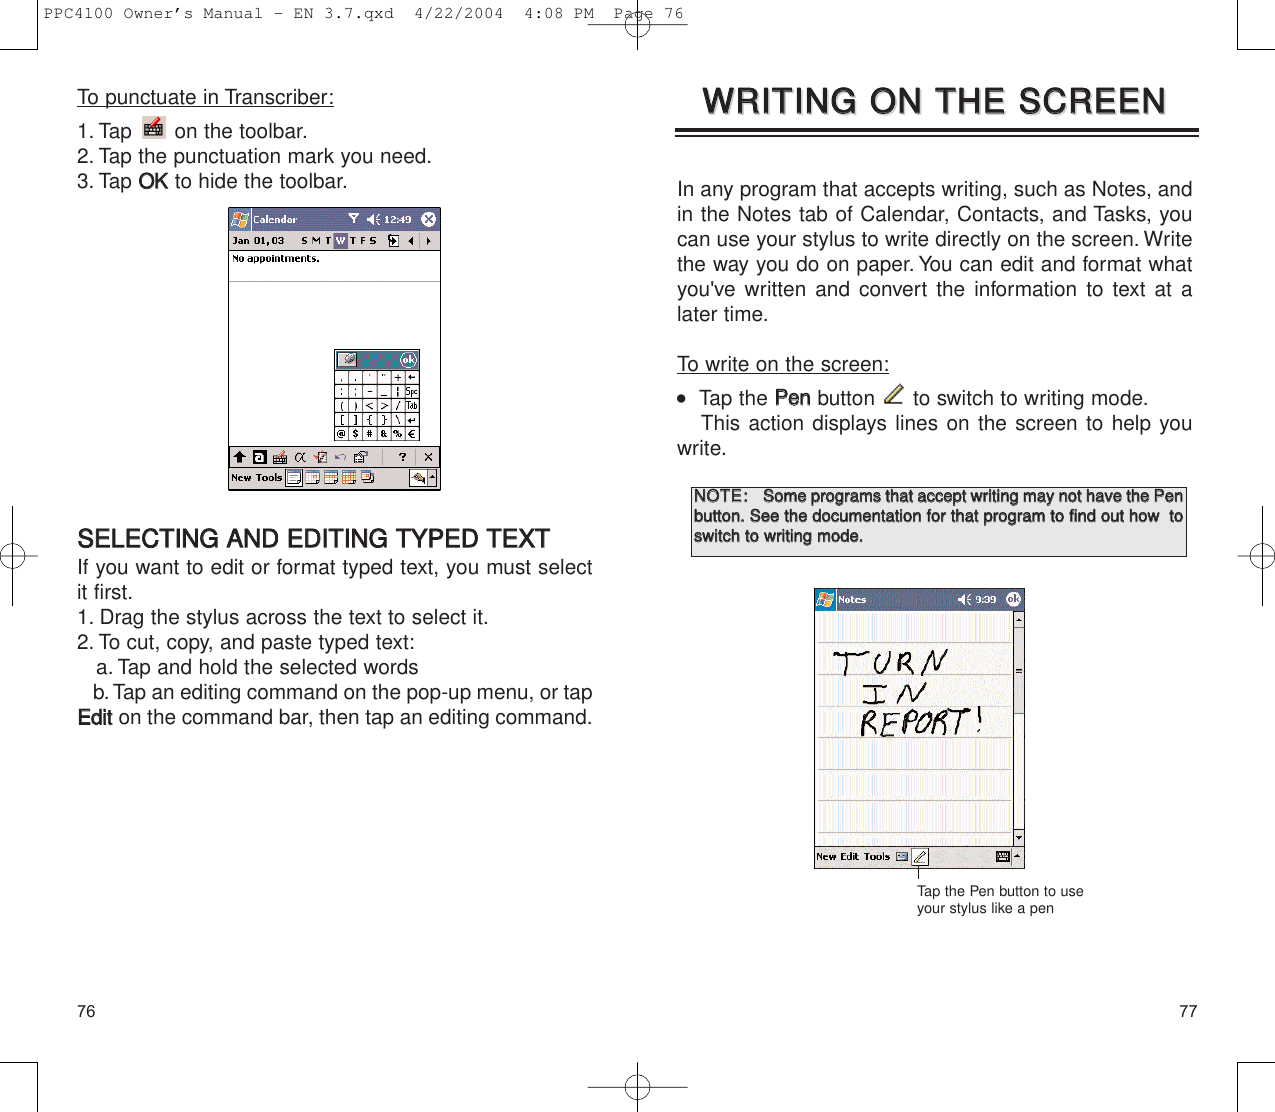 7776In any program that accepts writing, such as Notes, andin the Notes tab of Calendar, Contacts, and Tasks, youcan use your stylus to write directly on the screen. Writethe way you do on paper. You can edit and format whatyou&apos;ve written and convert the information to text at alater time.To write on the screen:   Tap the PPeennbutton  to switch to writing mode.This action displays lines on the screen to help youwrite.WWRRIITTIINNGG  OONN  TTHHEE  SSCCRREEEENNWWRRIITTIINNGG  OONN  TTHHEE  SSCCRREEEENNTap the Pen button to useyour stylus like a penNNOOTTEE::SSoommee  pprrooggrraammss  tthhaatt  aacccceepptt  wwrriittiinngg  mmaayy  nnoott  hhaavvee  tthhee  PPeennbbuuttttoonn..  SSeeee  tthhee  ddooccuummeennttaattiioonn  ffoorr  tthhaatt  pprrooggrraamm  ttoo  ffiinndd  oouutt  hhooww    ttoosswwiittcchh  ttoo  wwrriittiinngg  mmooddee..To punctuate in Transcriber:1. Tap  on the toolbar.2. Tap the punctuation mark you need.3. Tap OOKKto hide the toolbar.SSEELLEECCTTIINNGG  AANNDD  EEDDIITTIINNGG  TTYYPPEEDD  TTEEXXTTIf you want to edit or format typed text, you must selectit first.1. Drag the stylus across the text to select it.2. To cut, copy, and paste typed text:a. Tap and hold the selected wordsb.Tap an editing command on the pop-up menu, or tapEEddiitton the command bar, then tap an editing command.PPC4100 Owner’s Manual - EN 3.7.qxd  4/22/2004  4:08 PM  Page 76